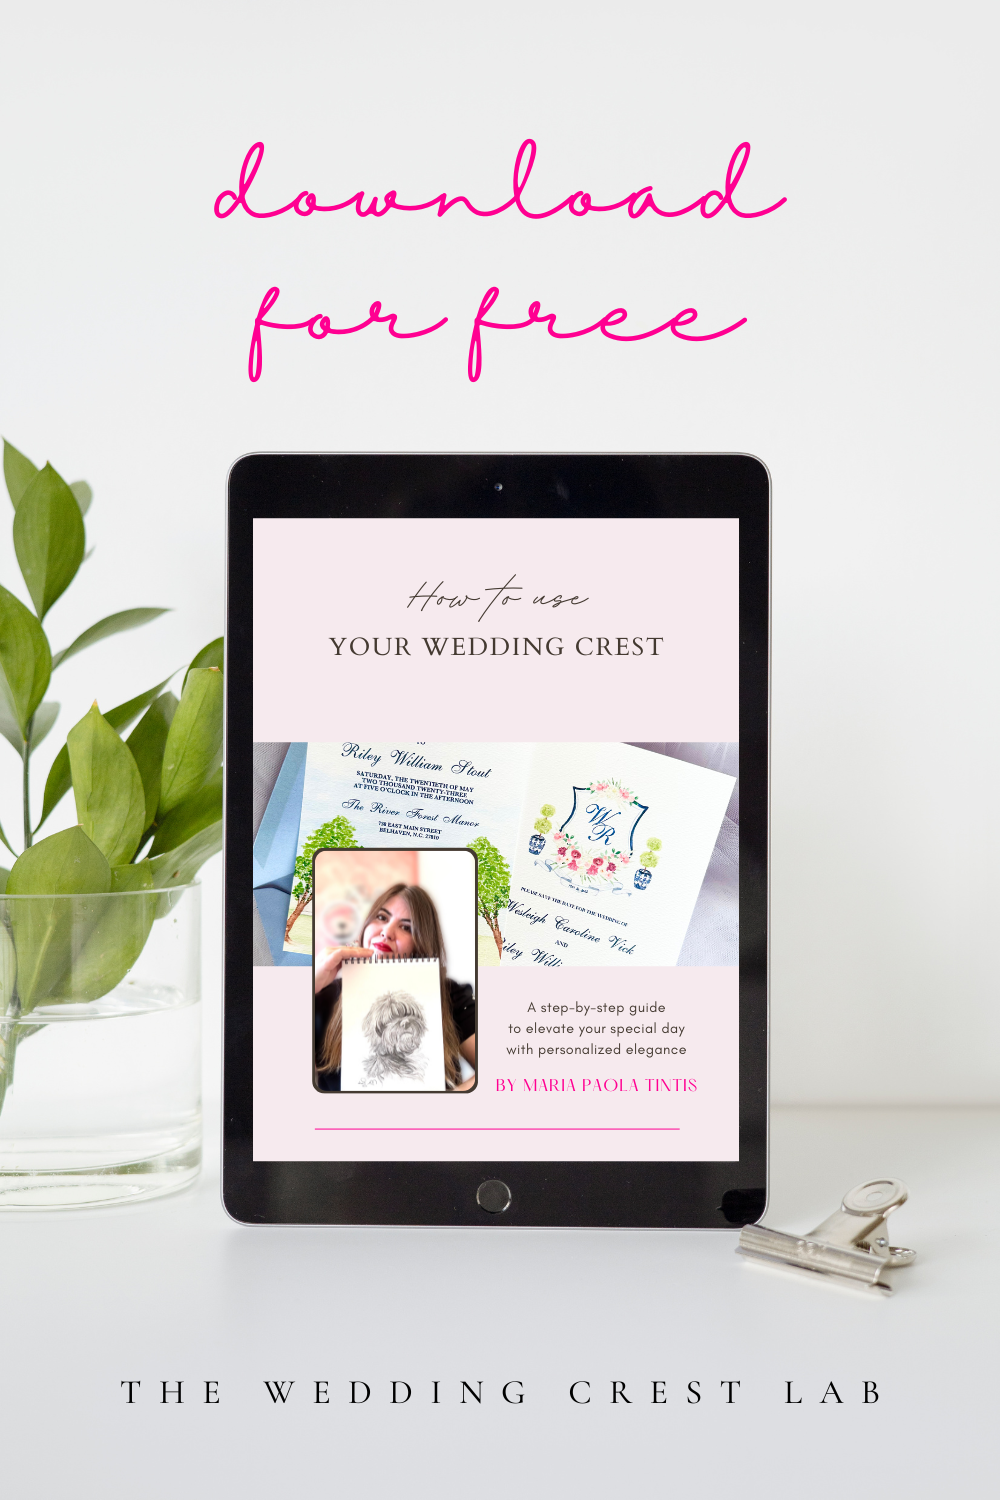 How to use your wedding crest - free ebook